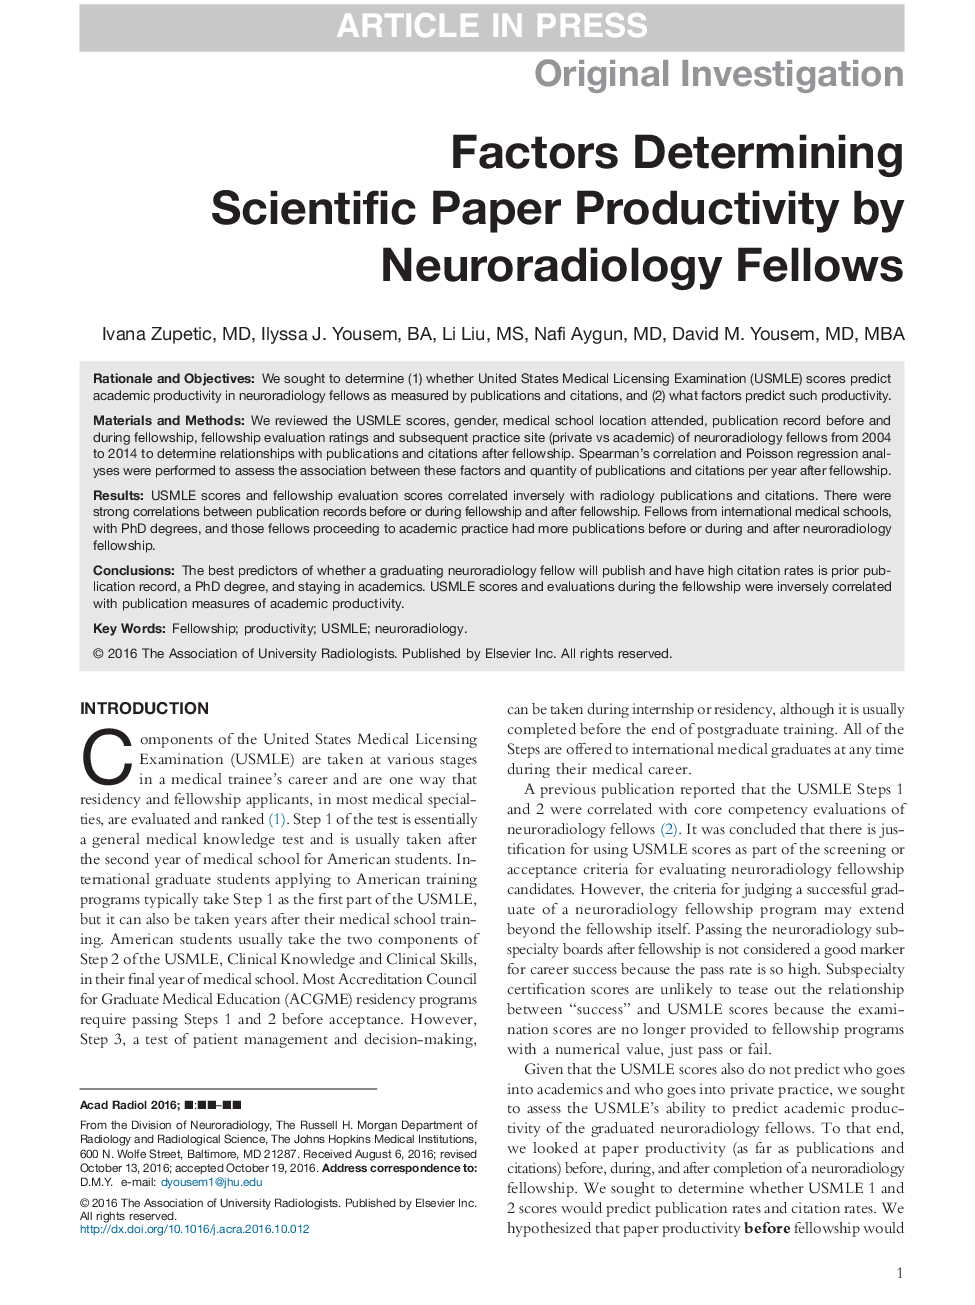 Factors Determining Scientific Paper Productivity by Neuroradiology Fellows